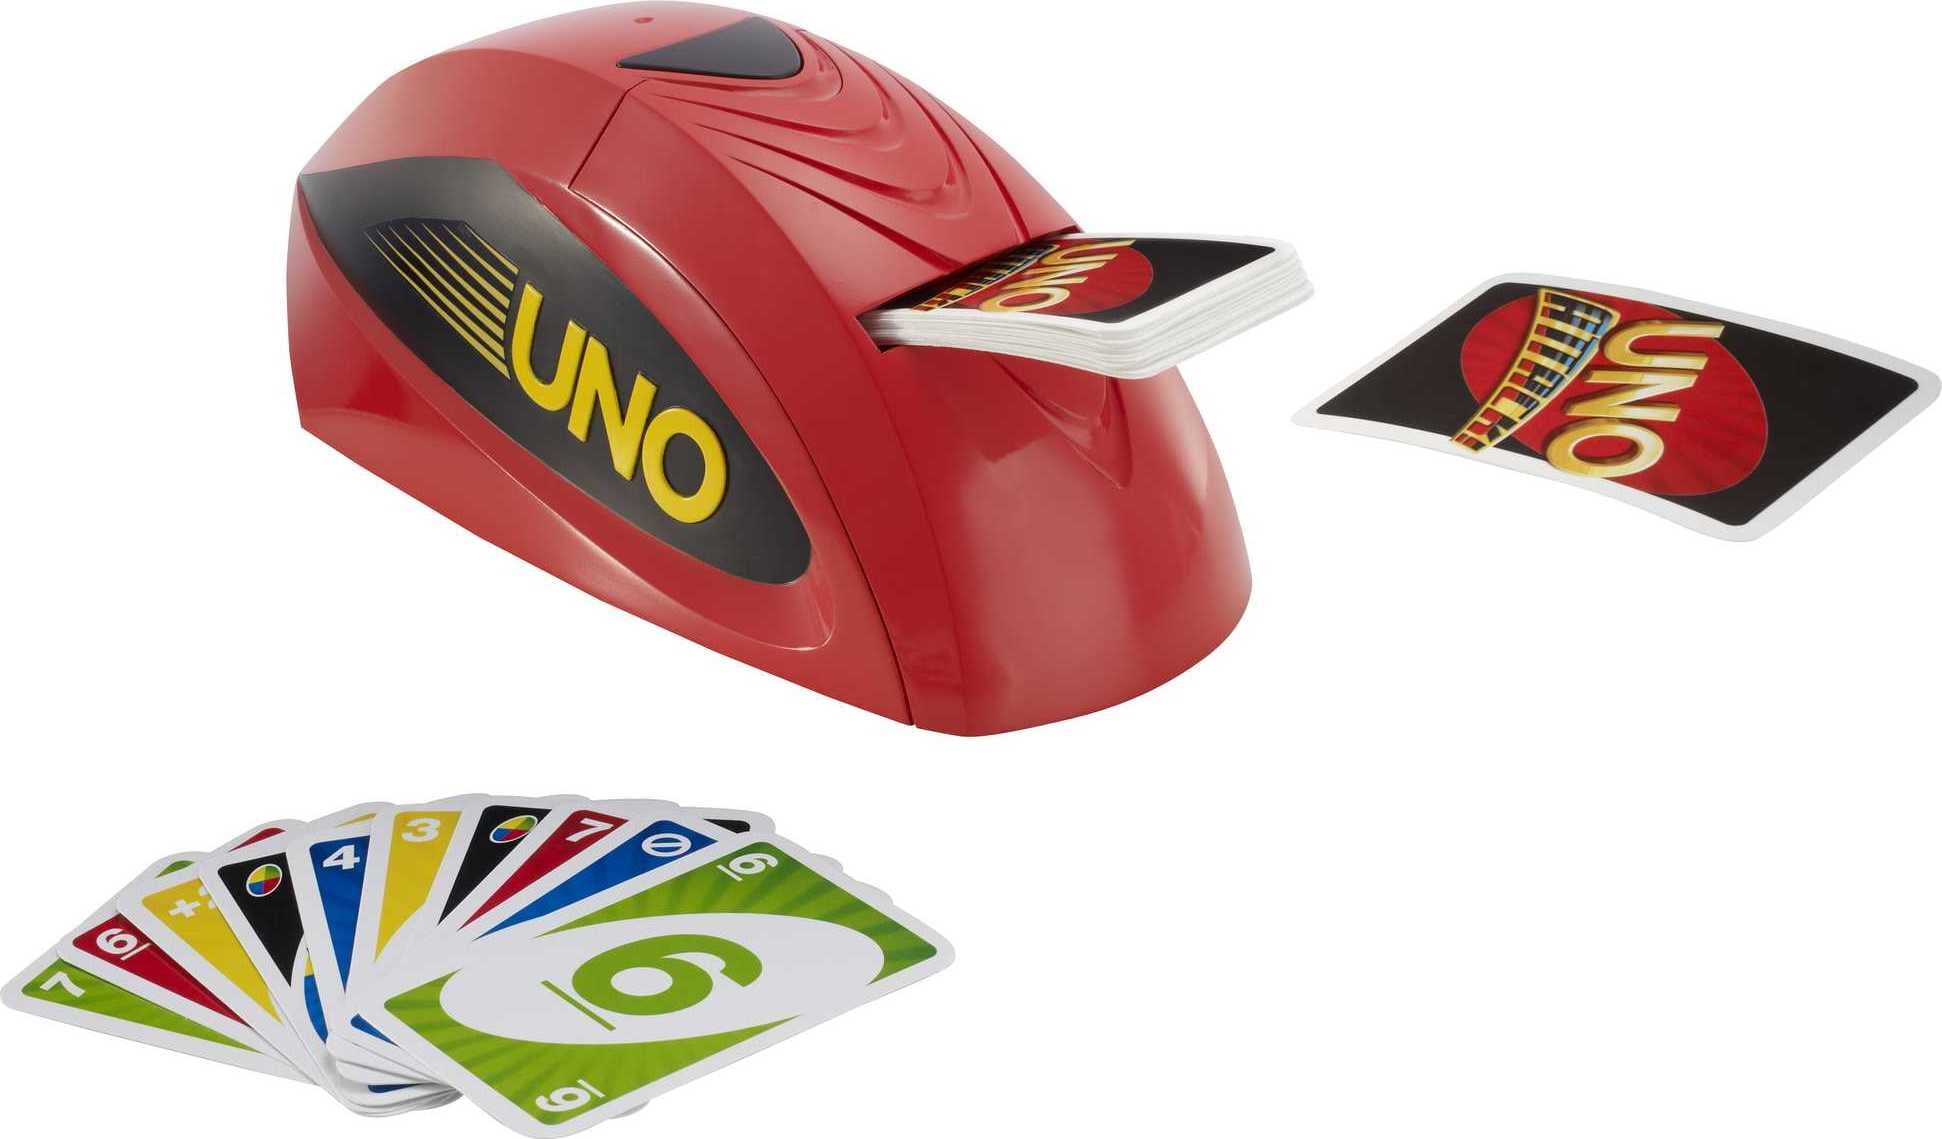 UNO ATTACK! Rapid Fire Card Game for 2-10 Players Ages 7Y+